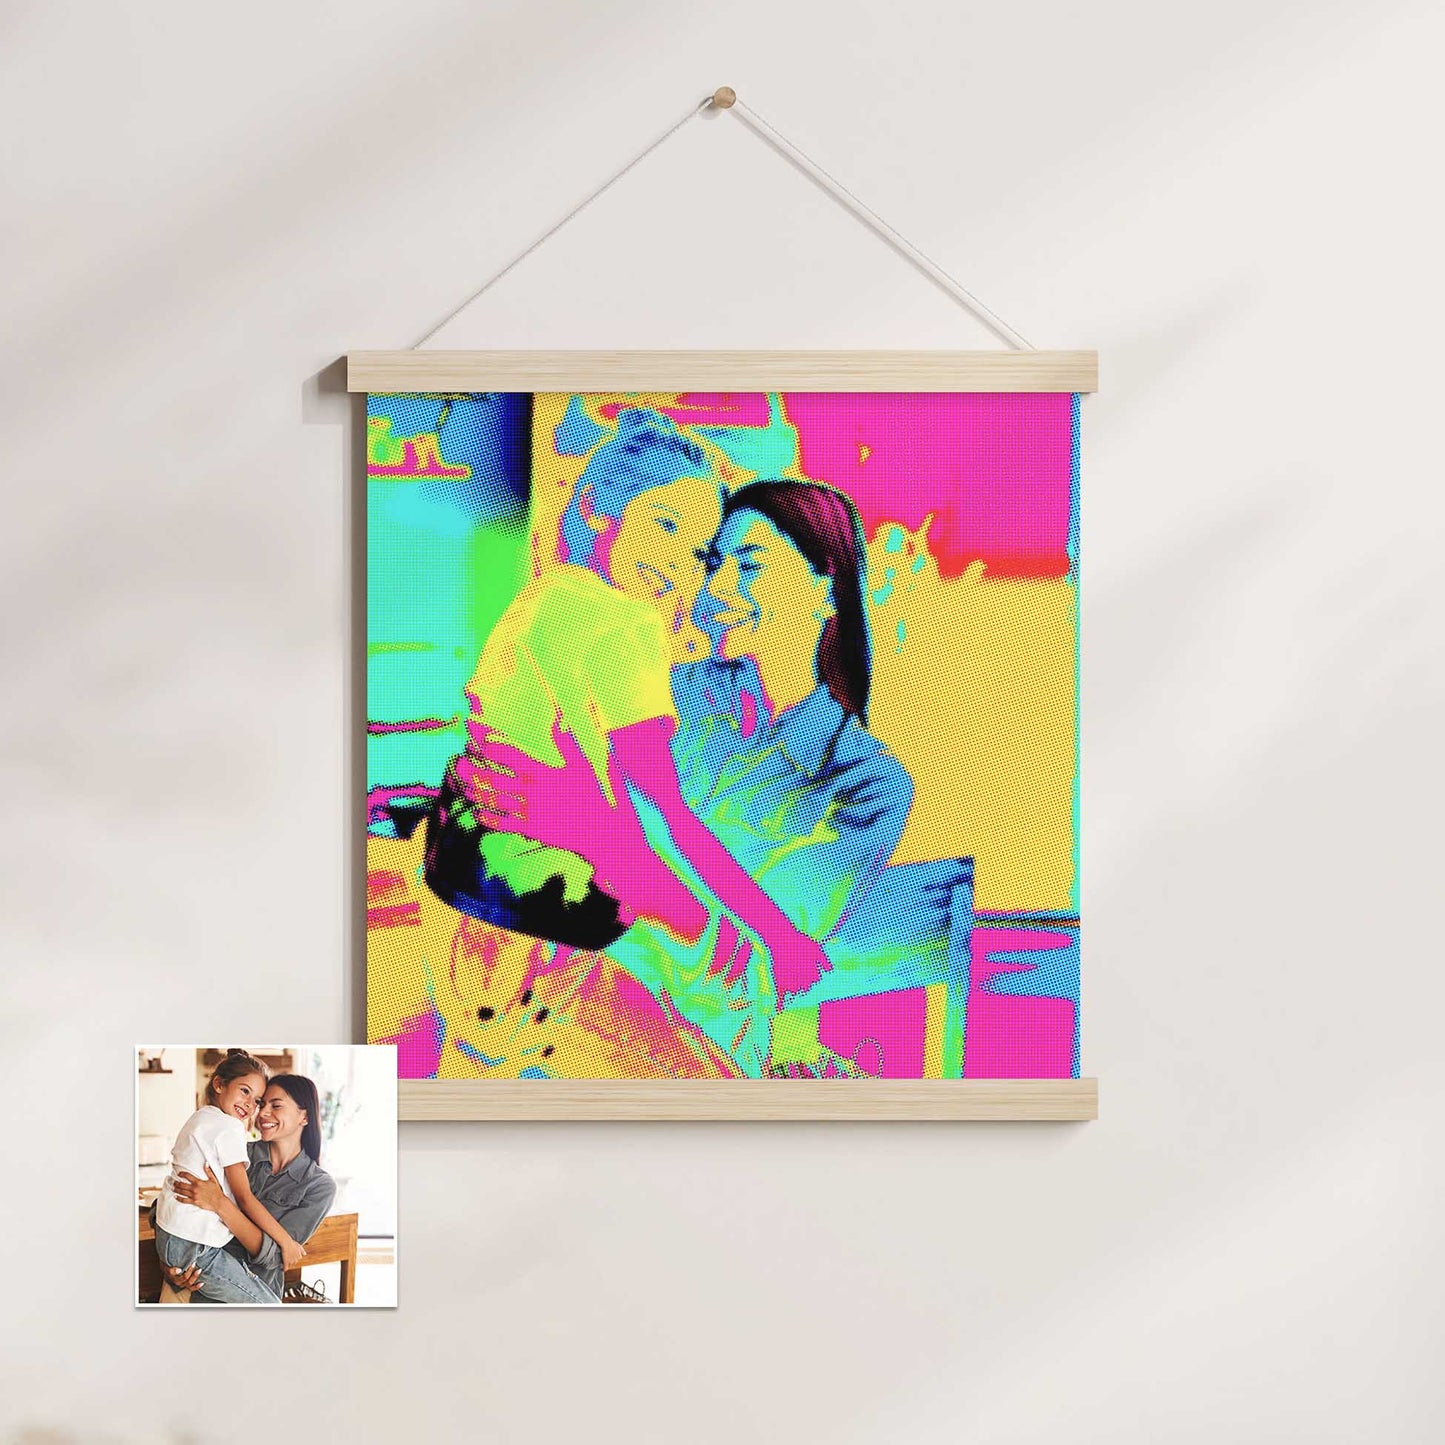 Elevate your interior design with the Personalised Graffiti Street Art Poster Hanger. This unique decor piece combines the best of street art aesthetics with a personal touch